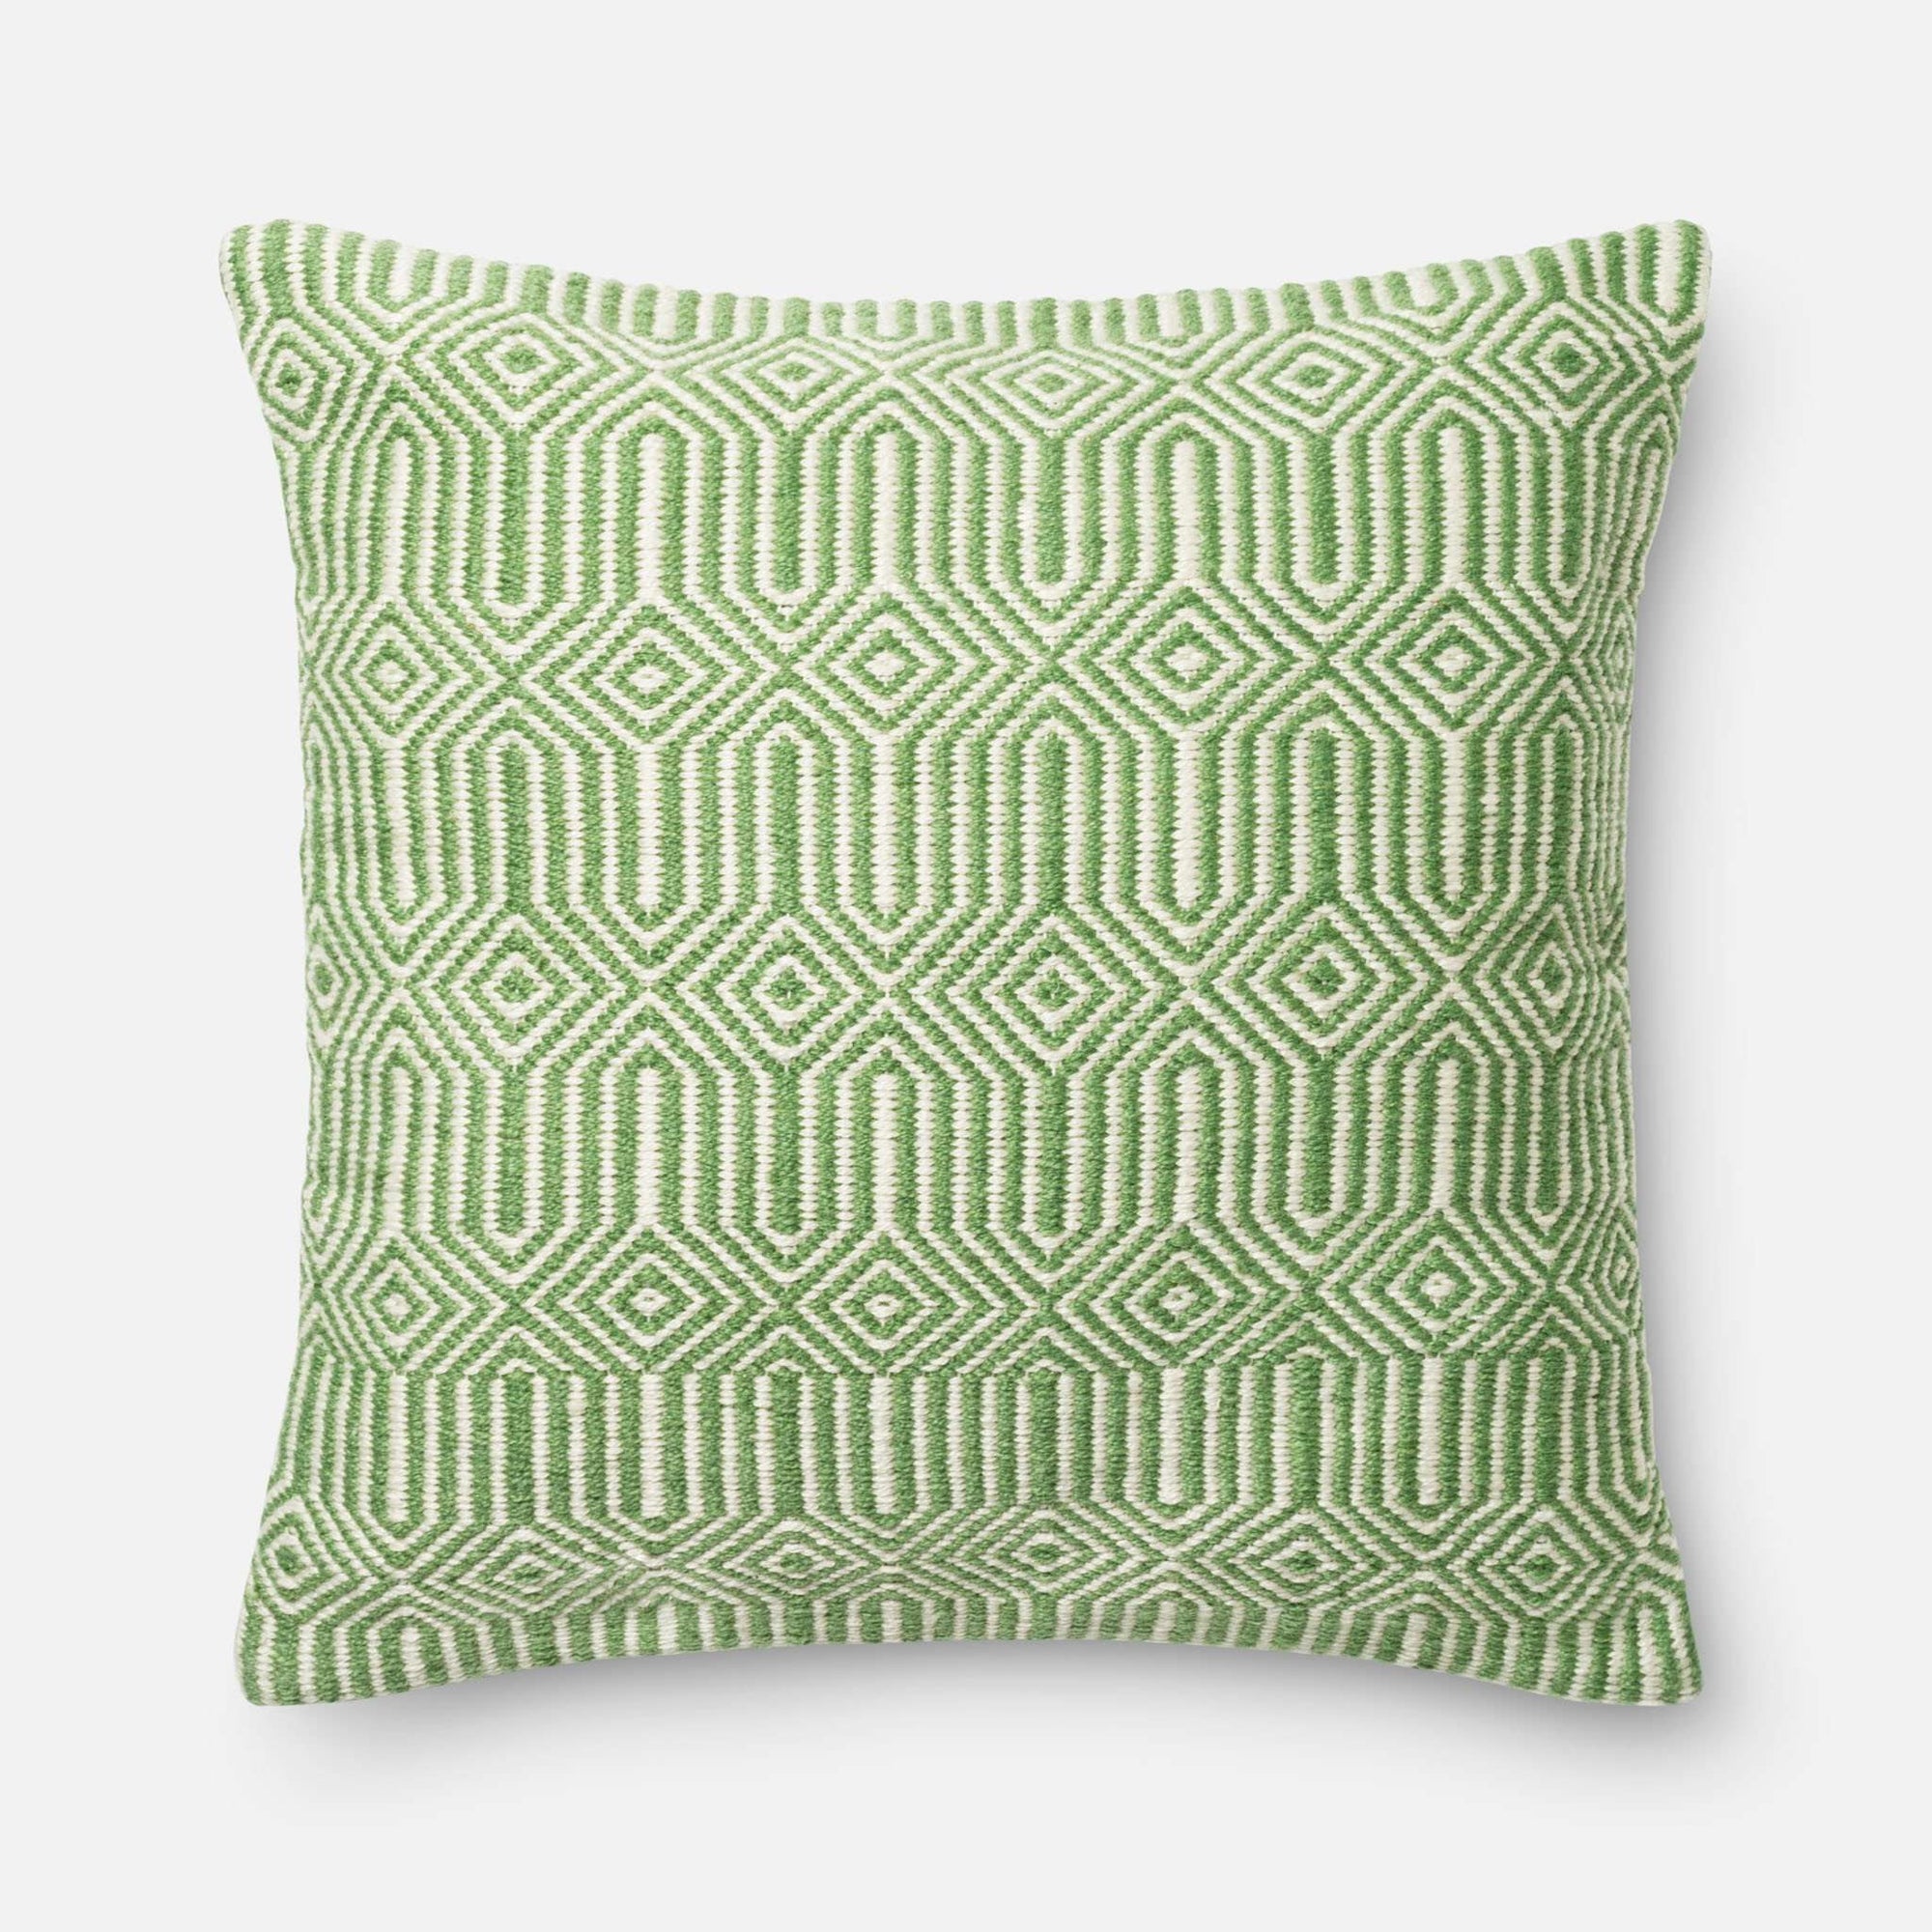 Green / Ivory Square P0339 Pillow - Rug & Home